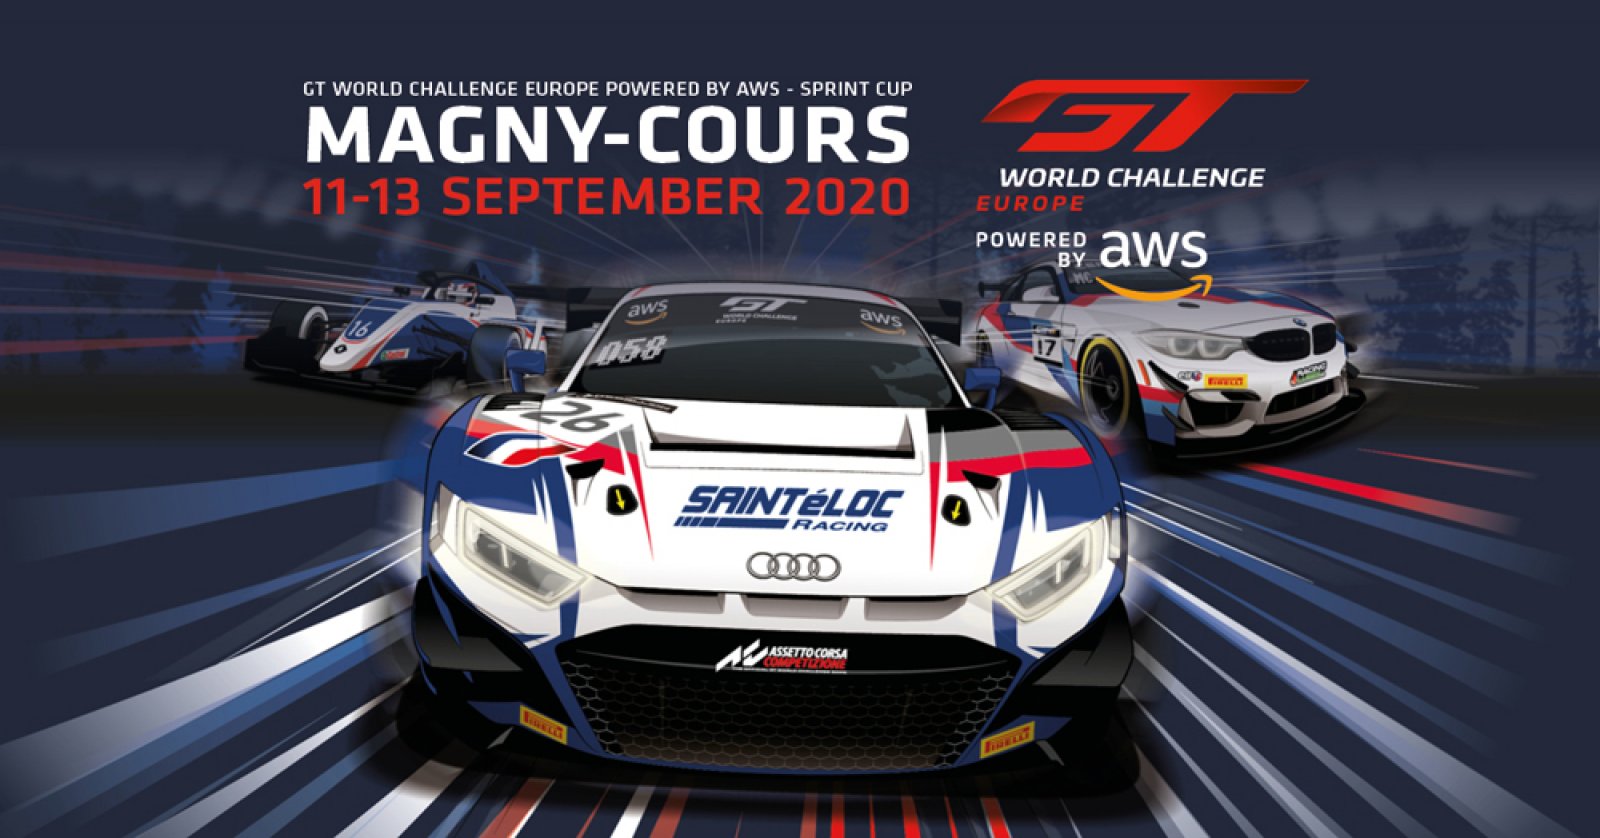 Sprint Cup campaign reaches halfway mark as GT World Challenge Europe Powered by AWS heads for Magny-Cours